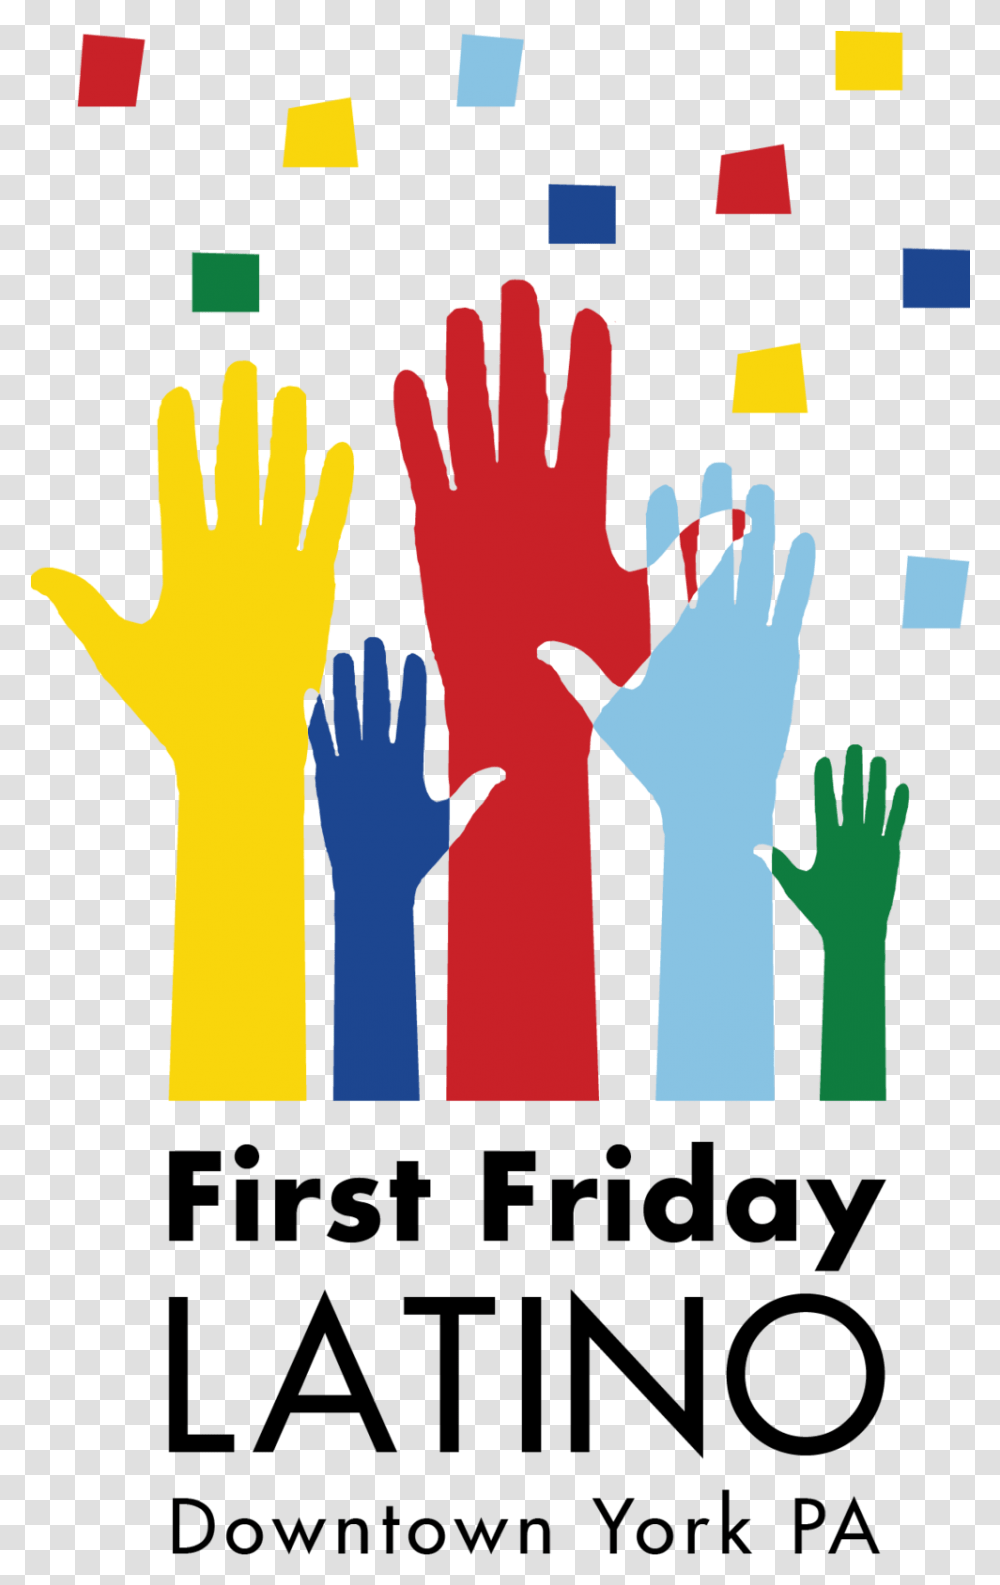 First Friday Latino Logo Illustration, Poster, Hand, Crowd Transparent Png